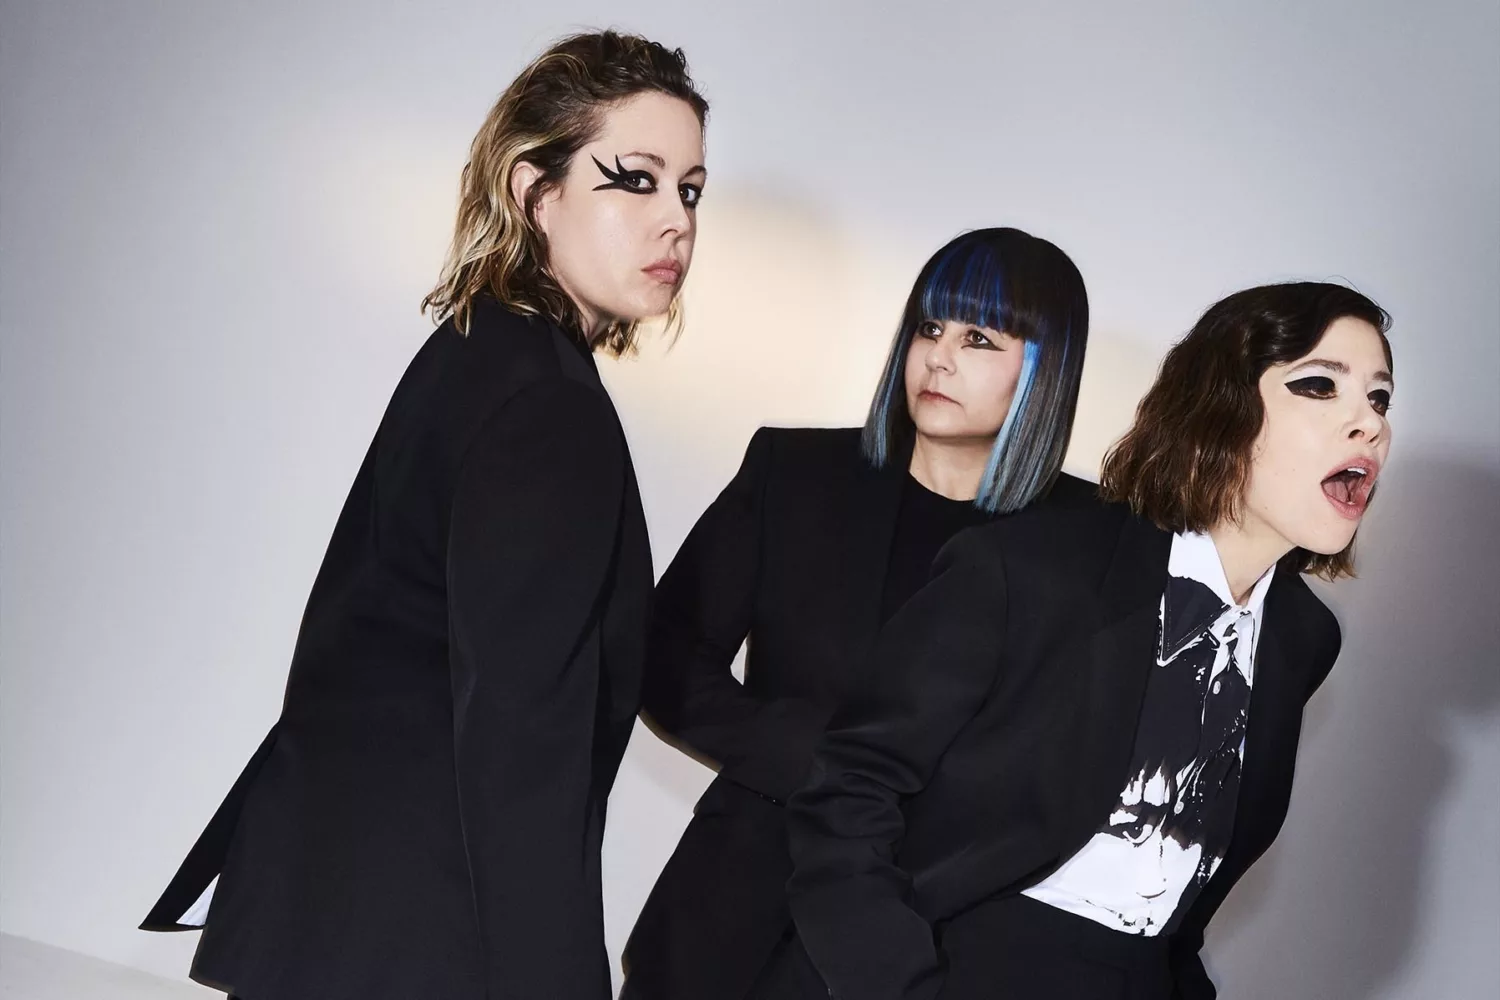 Sleater-Kinney announce full details of St. Vincent-produced album 'The Center Won't Hold, plus a brand new single